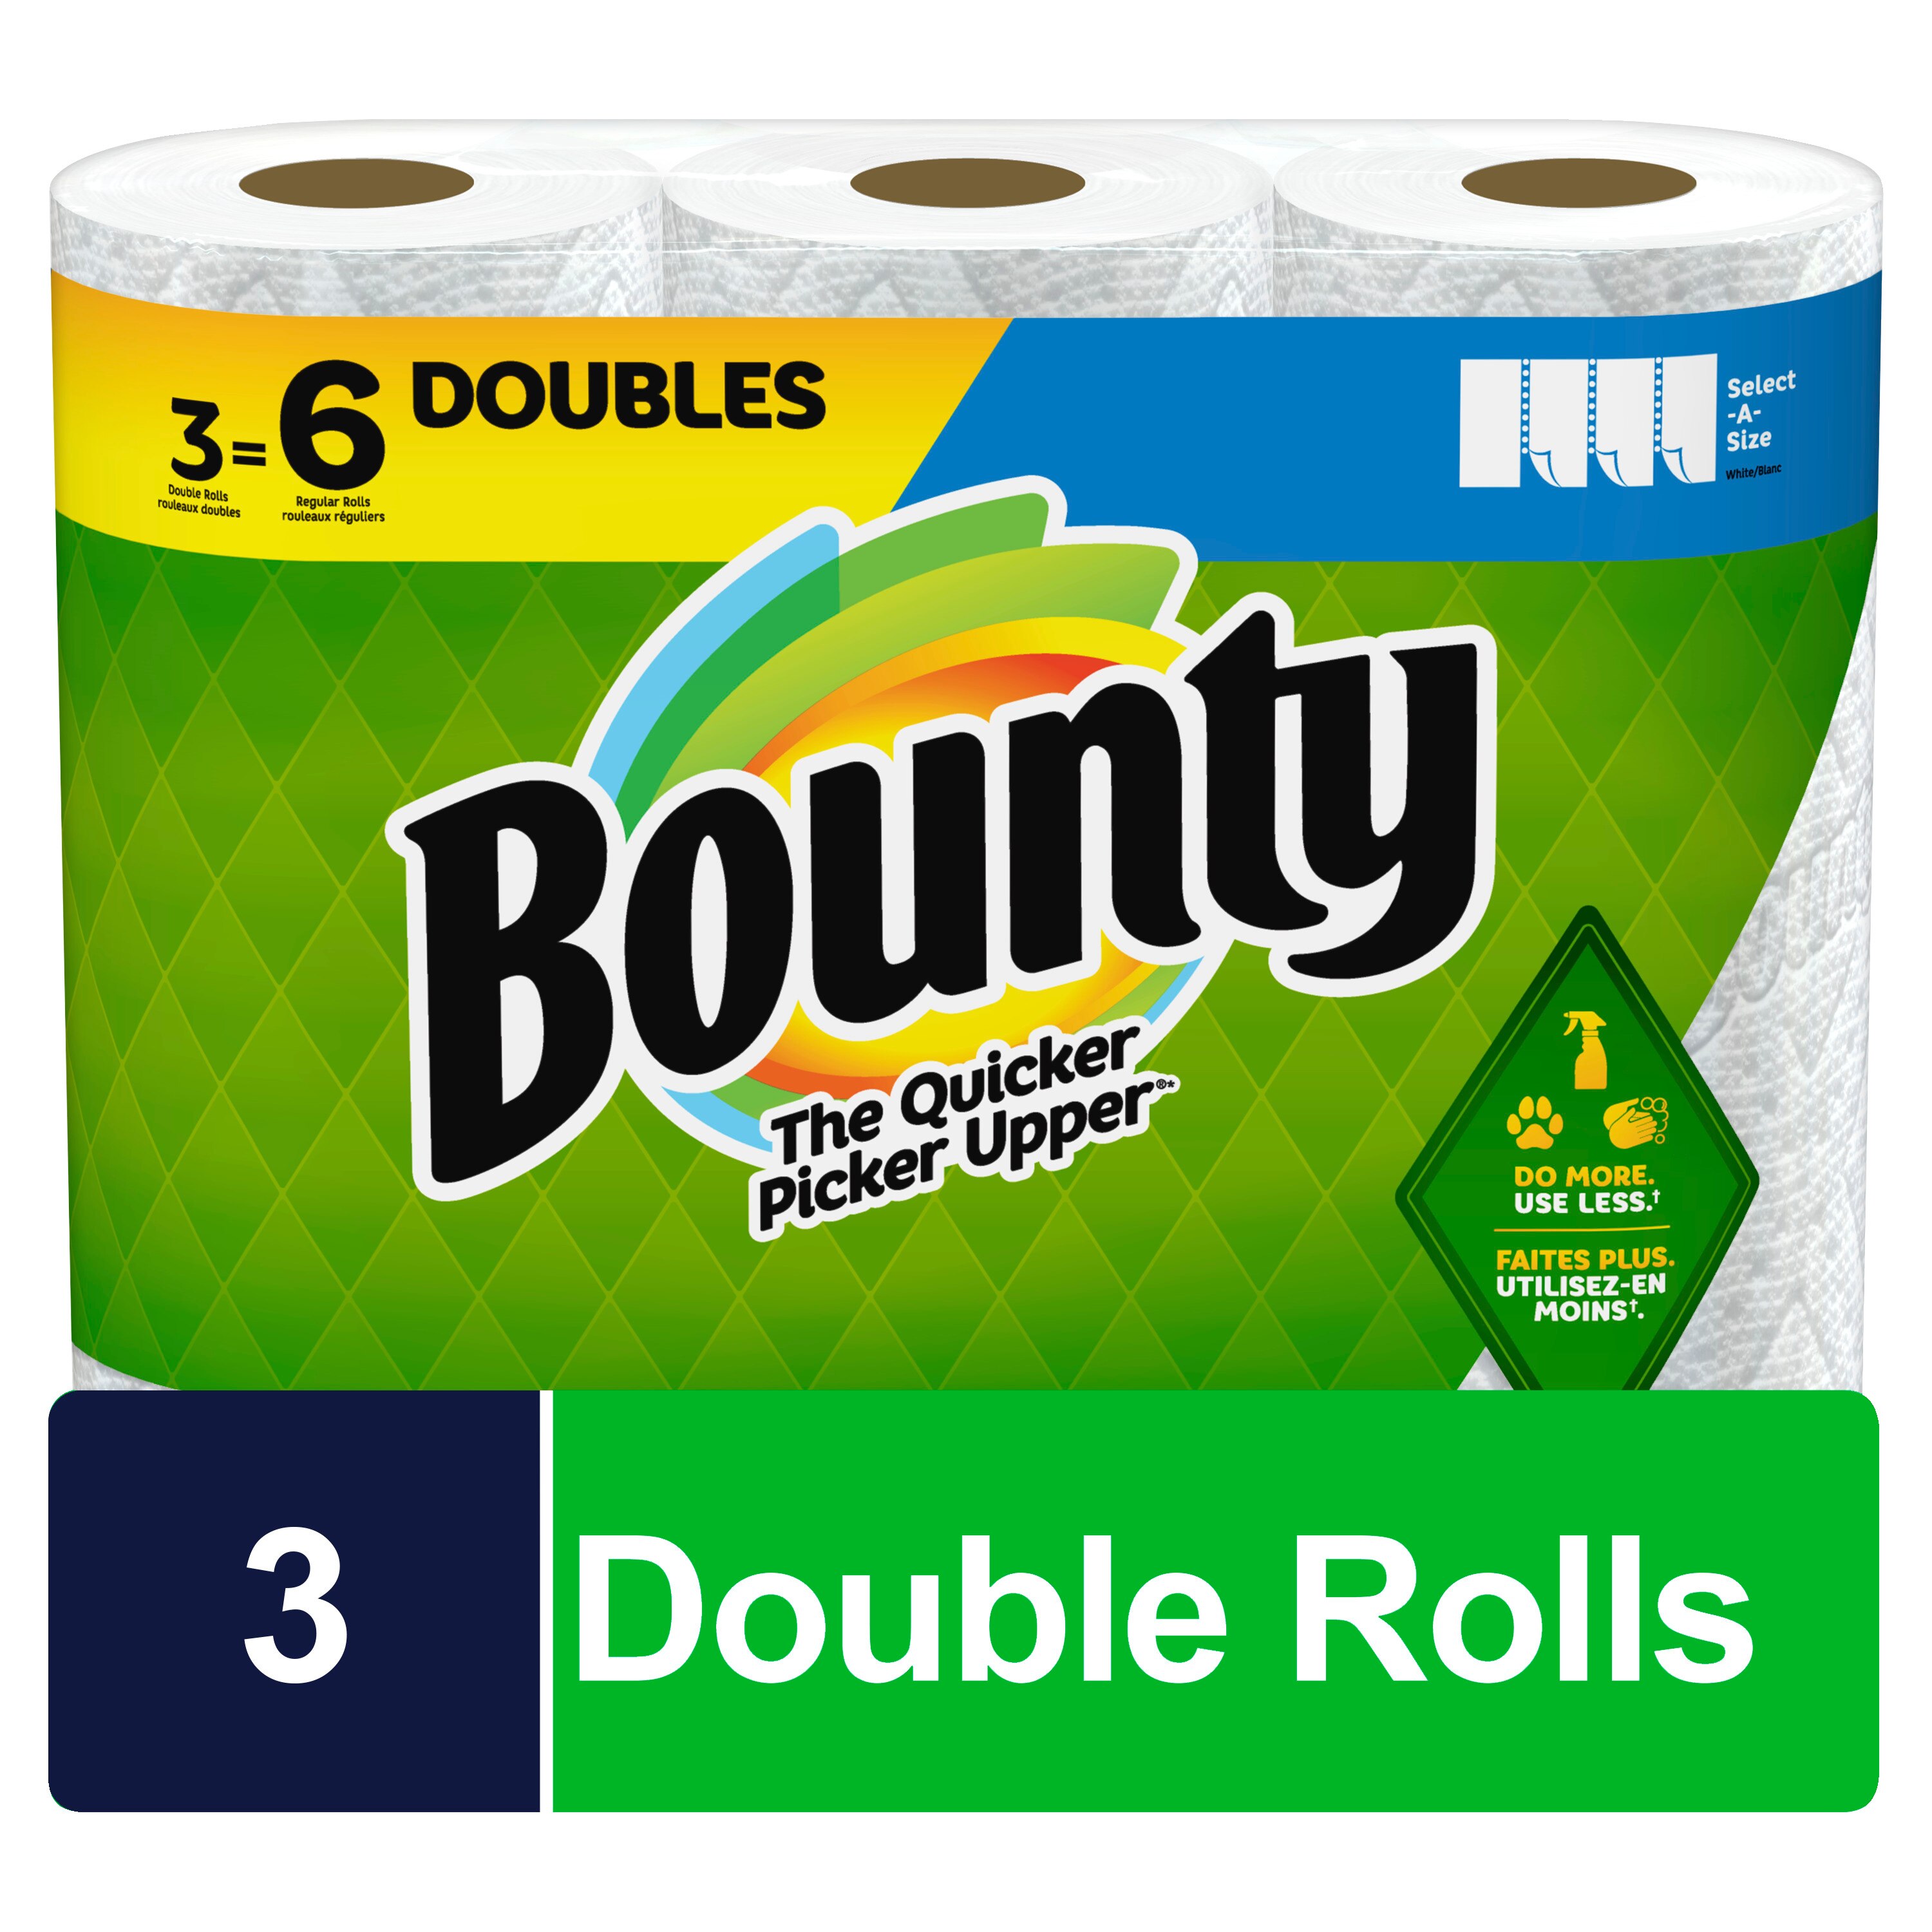 Customer Reviews: Bounty Select-A-Size Paper Towels, 2 Triple Rolls - CVS  Pharmacy Page 5